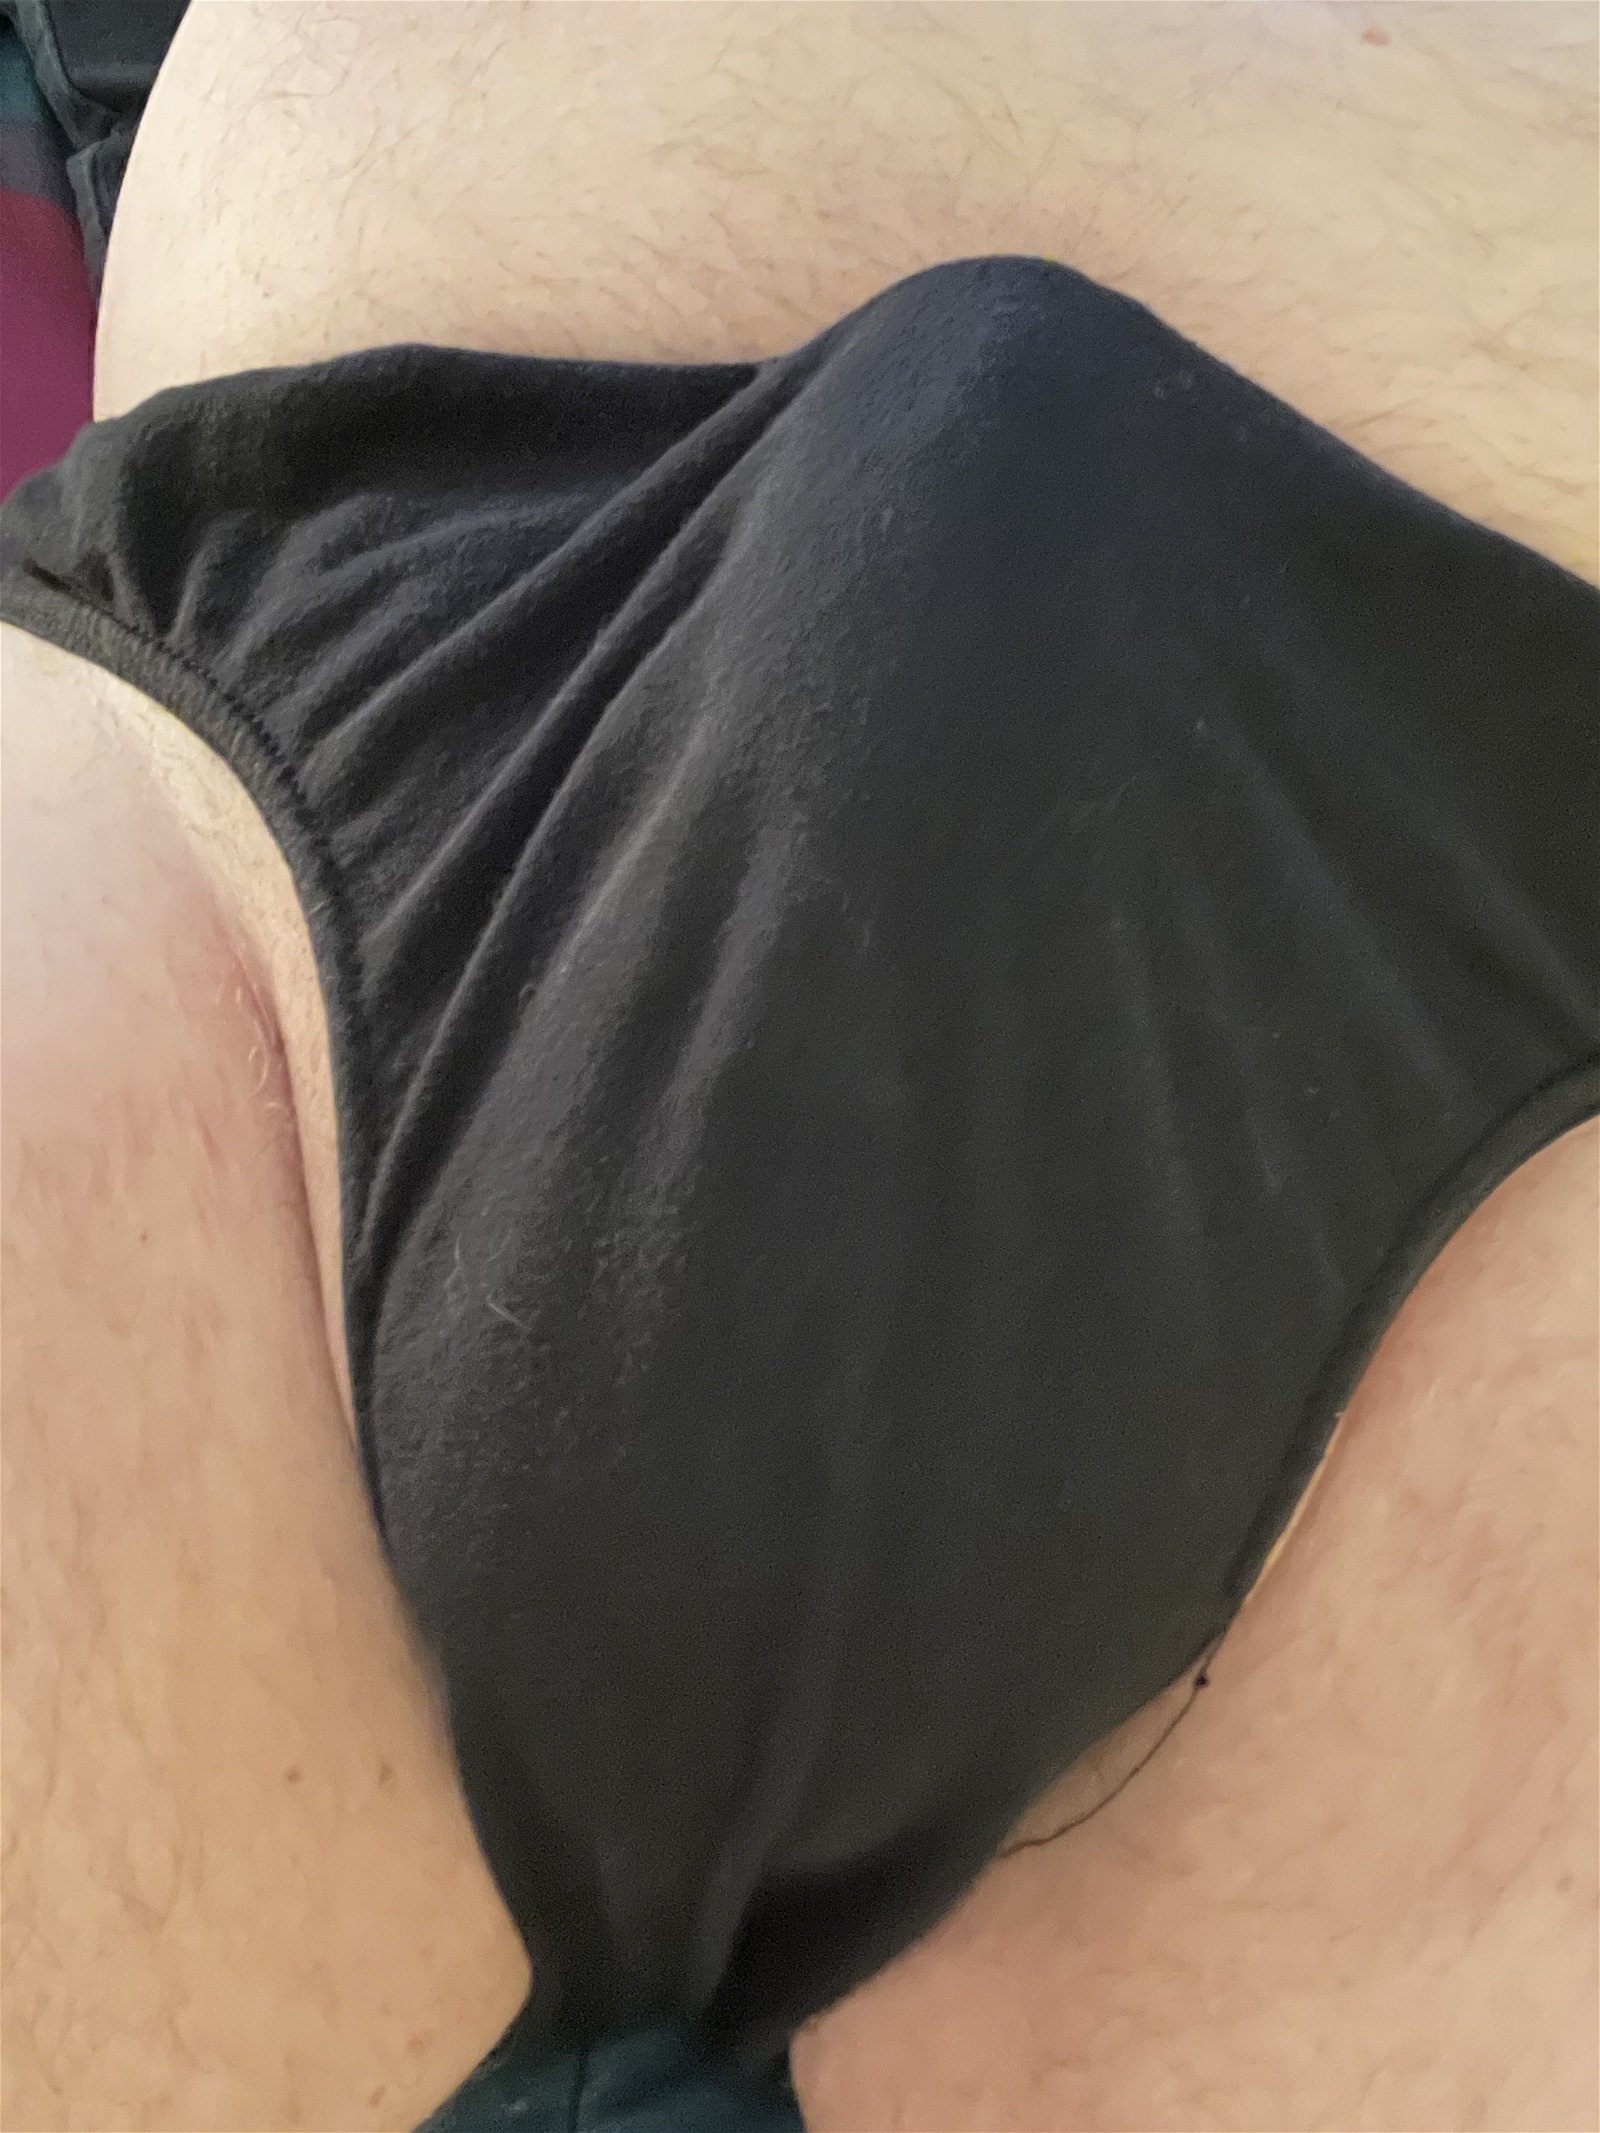 Photo by MrBlueSky2020 with the username @MrBlueSky2020, who is a verified user,  April 4, 2023 at 11:20 AM. The post is about the topic Bicurious and the text says 'Feeling horny'